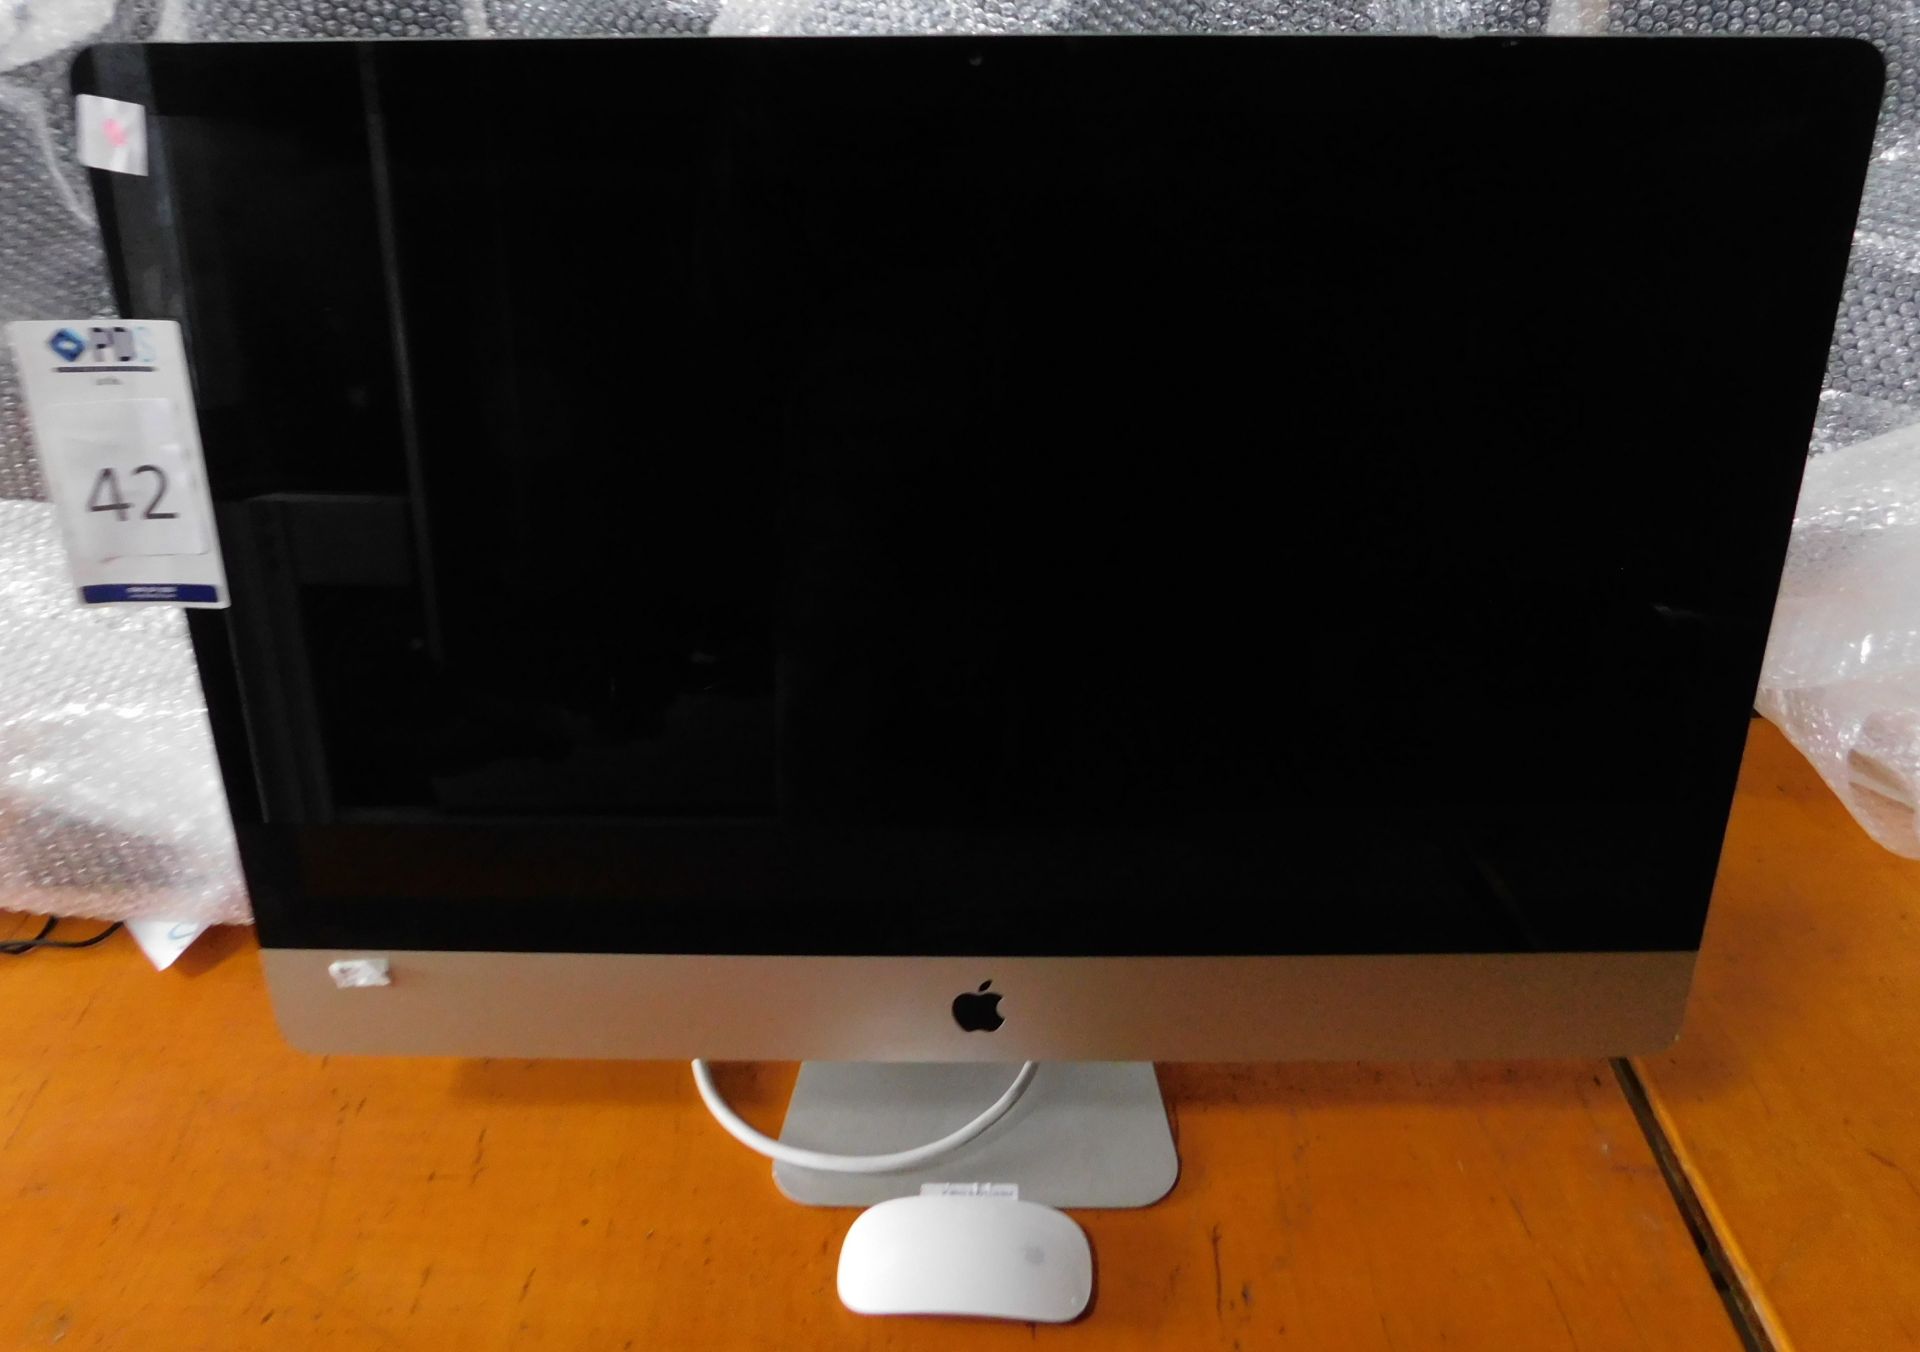 Apple iMac 27inch 2.7Ghz, Core i5, Model Number: A1312, Serial Number: C02HK29YDHJP (Located